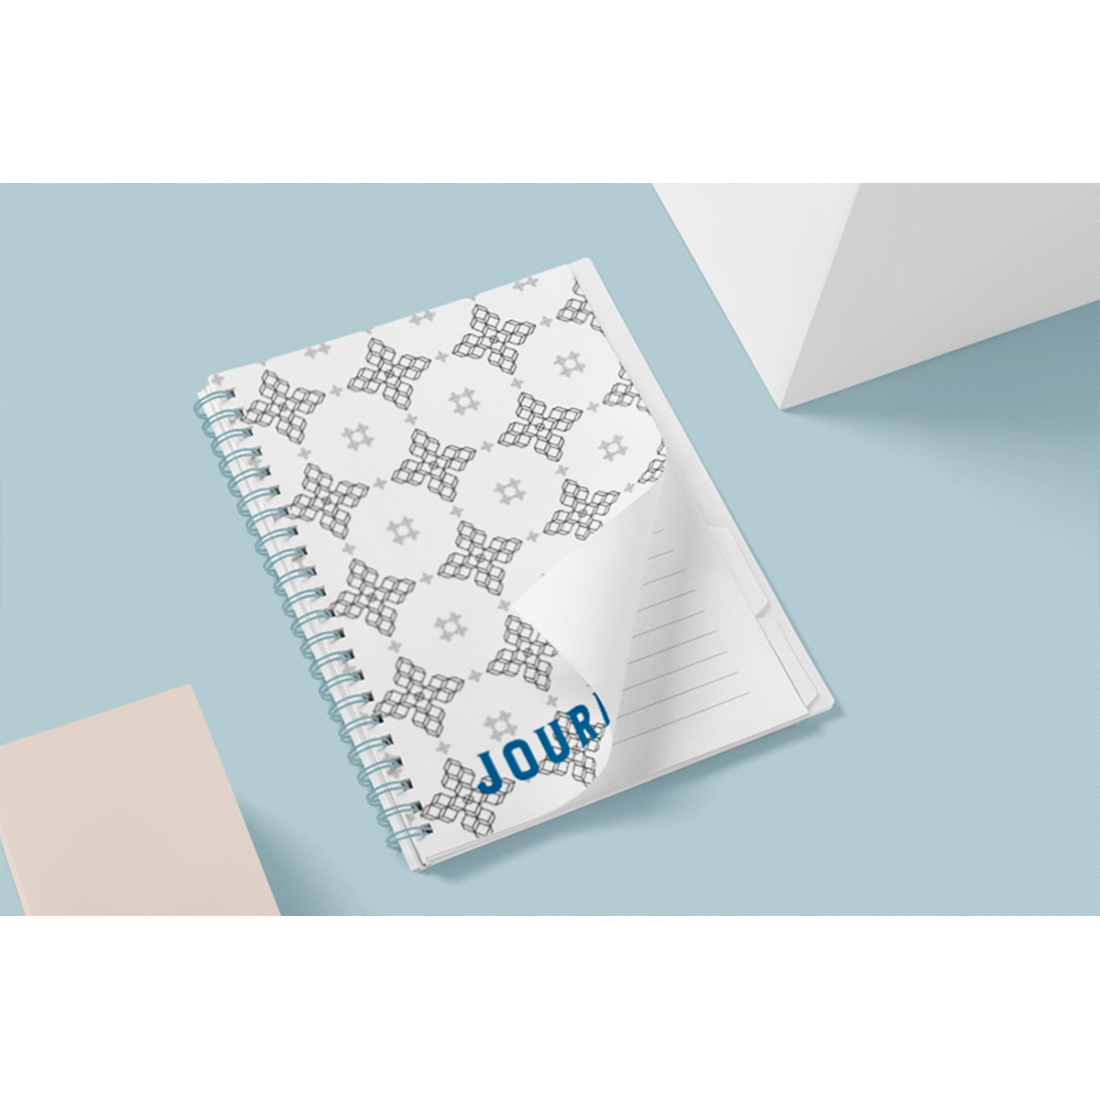 Picture of a notebook with an adorable cover with geometric patterns